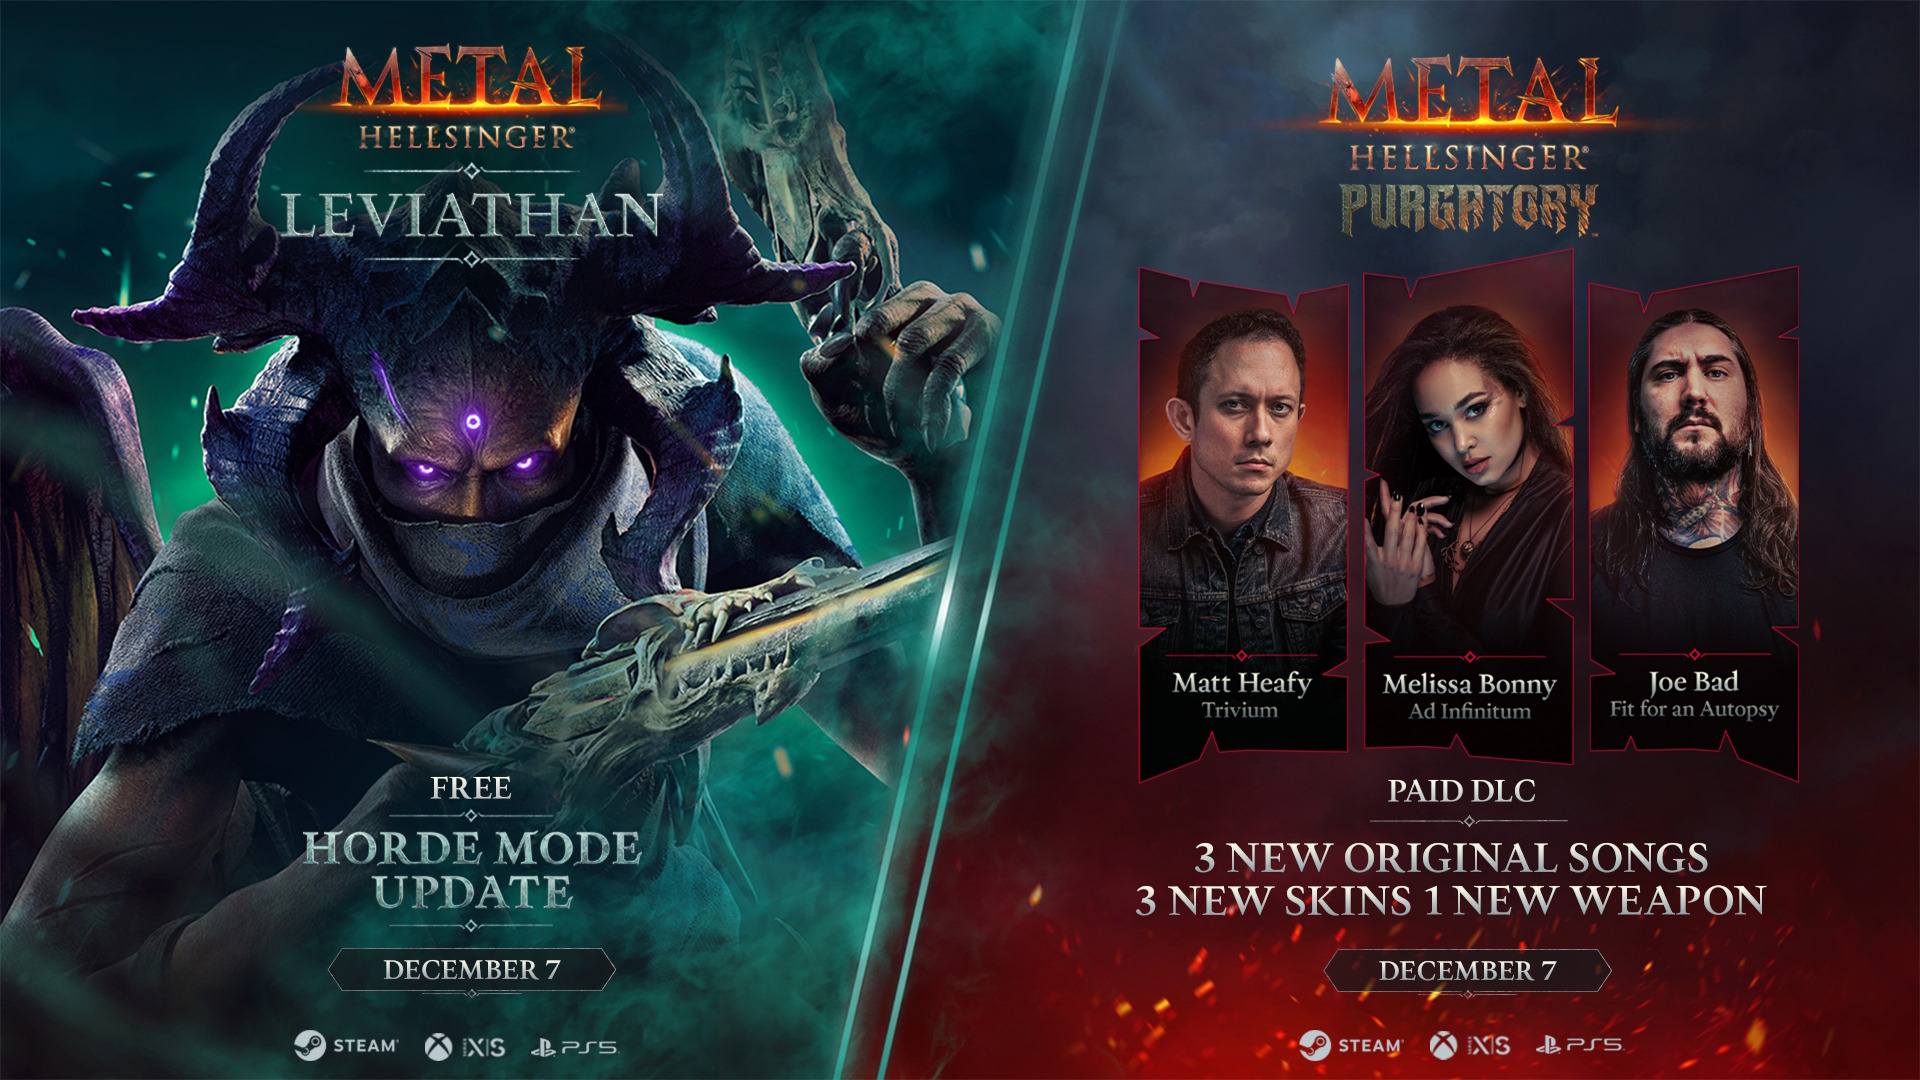 Reviews Are In! Pricing revealed! · Metal: Hellsinger update for